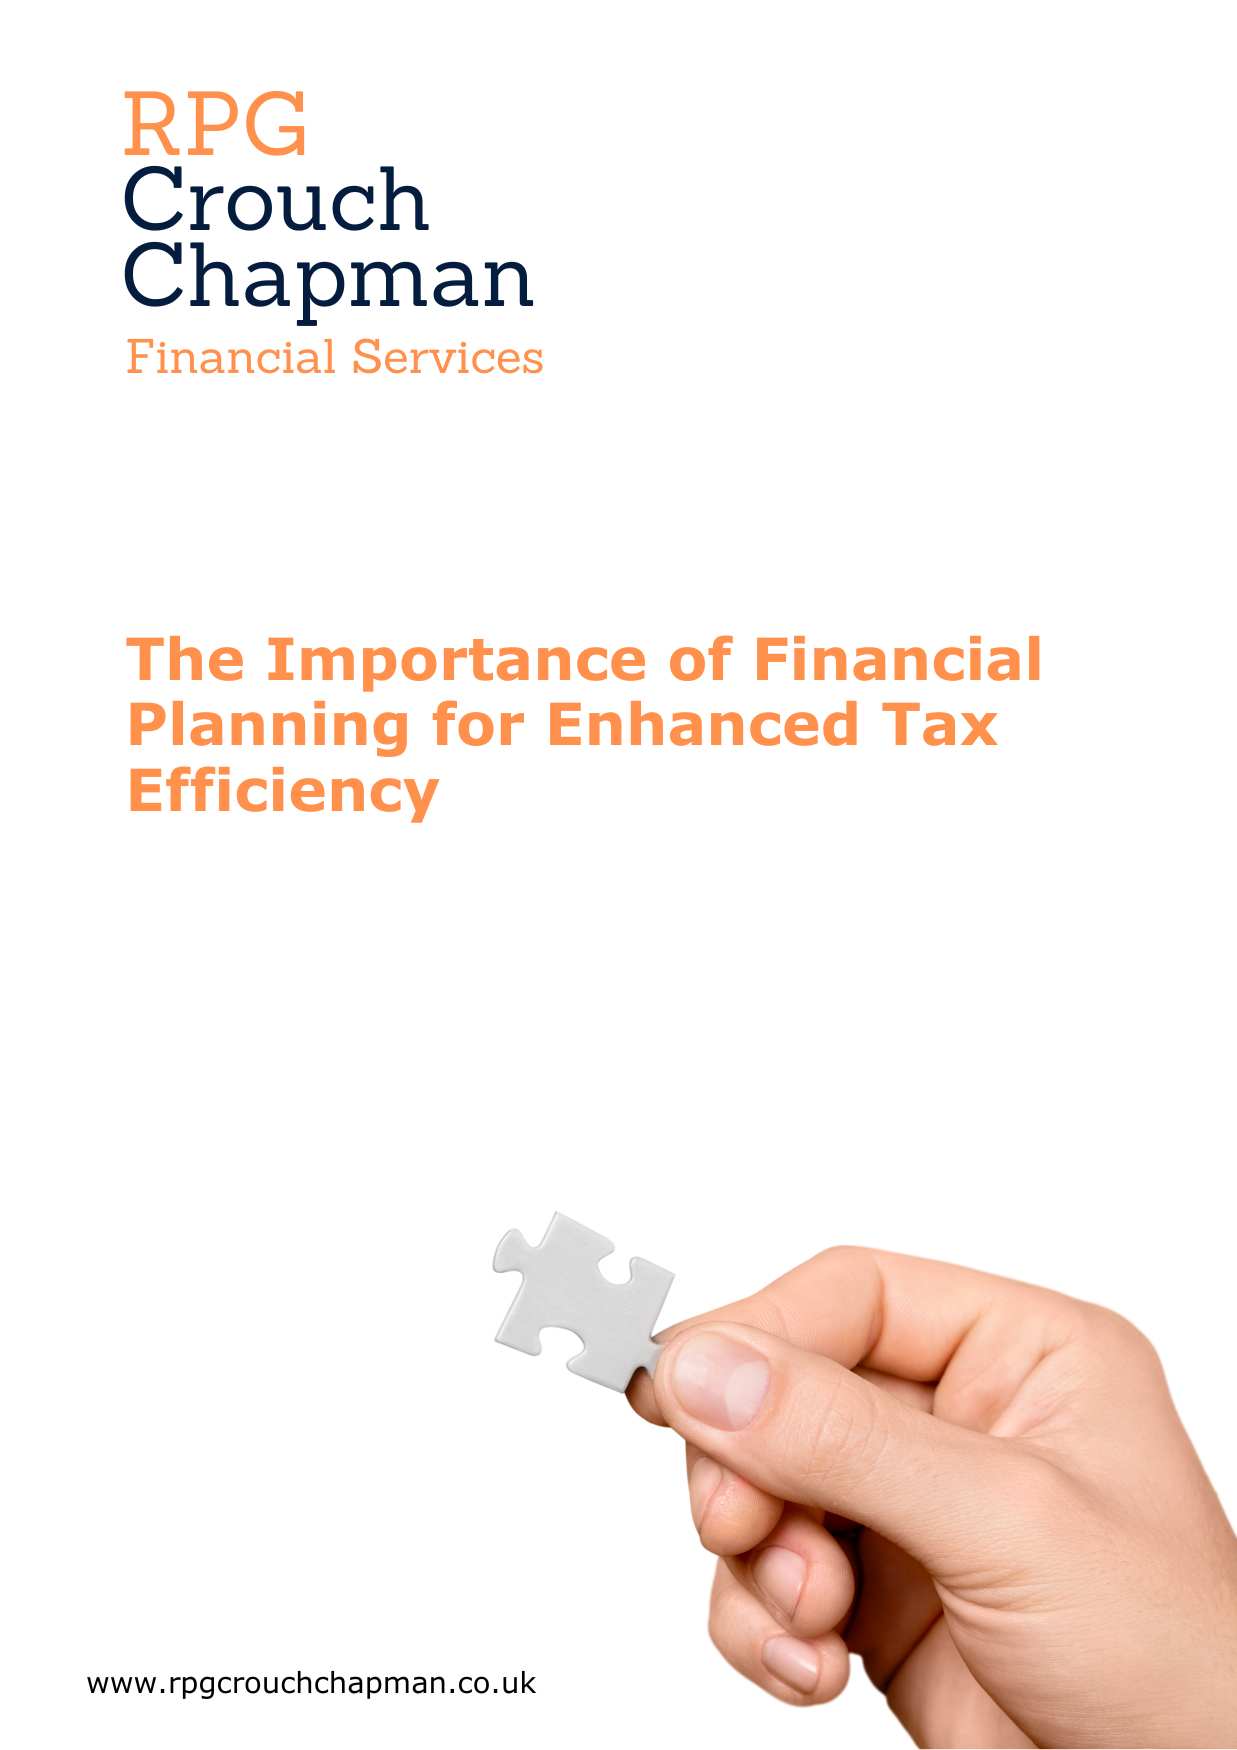 Financial planning for enhanced tax efficiency